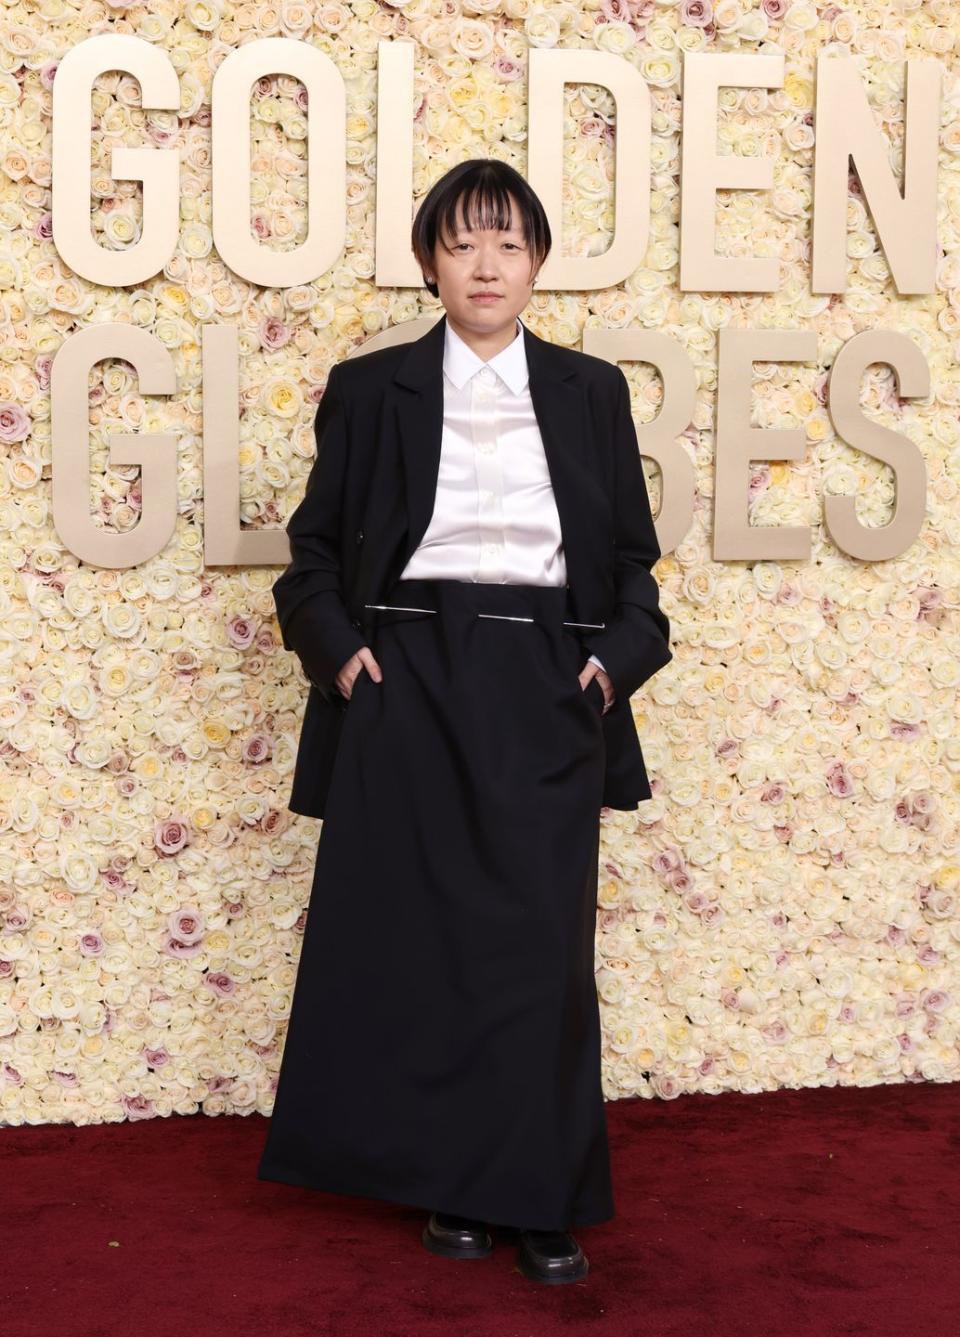 beverly hills, california january 07 celine song attends the 81st annual golden globe awards at the beverly hilton on january 07, 2024 in beverly hills, california photo by amy sussmangetty images